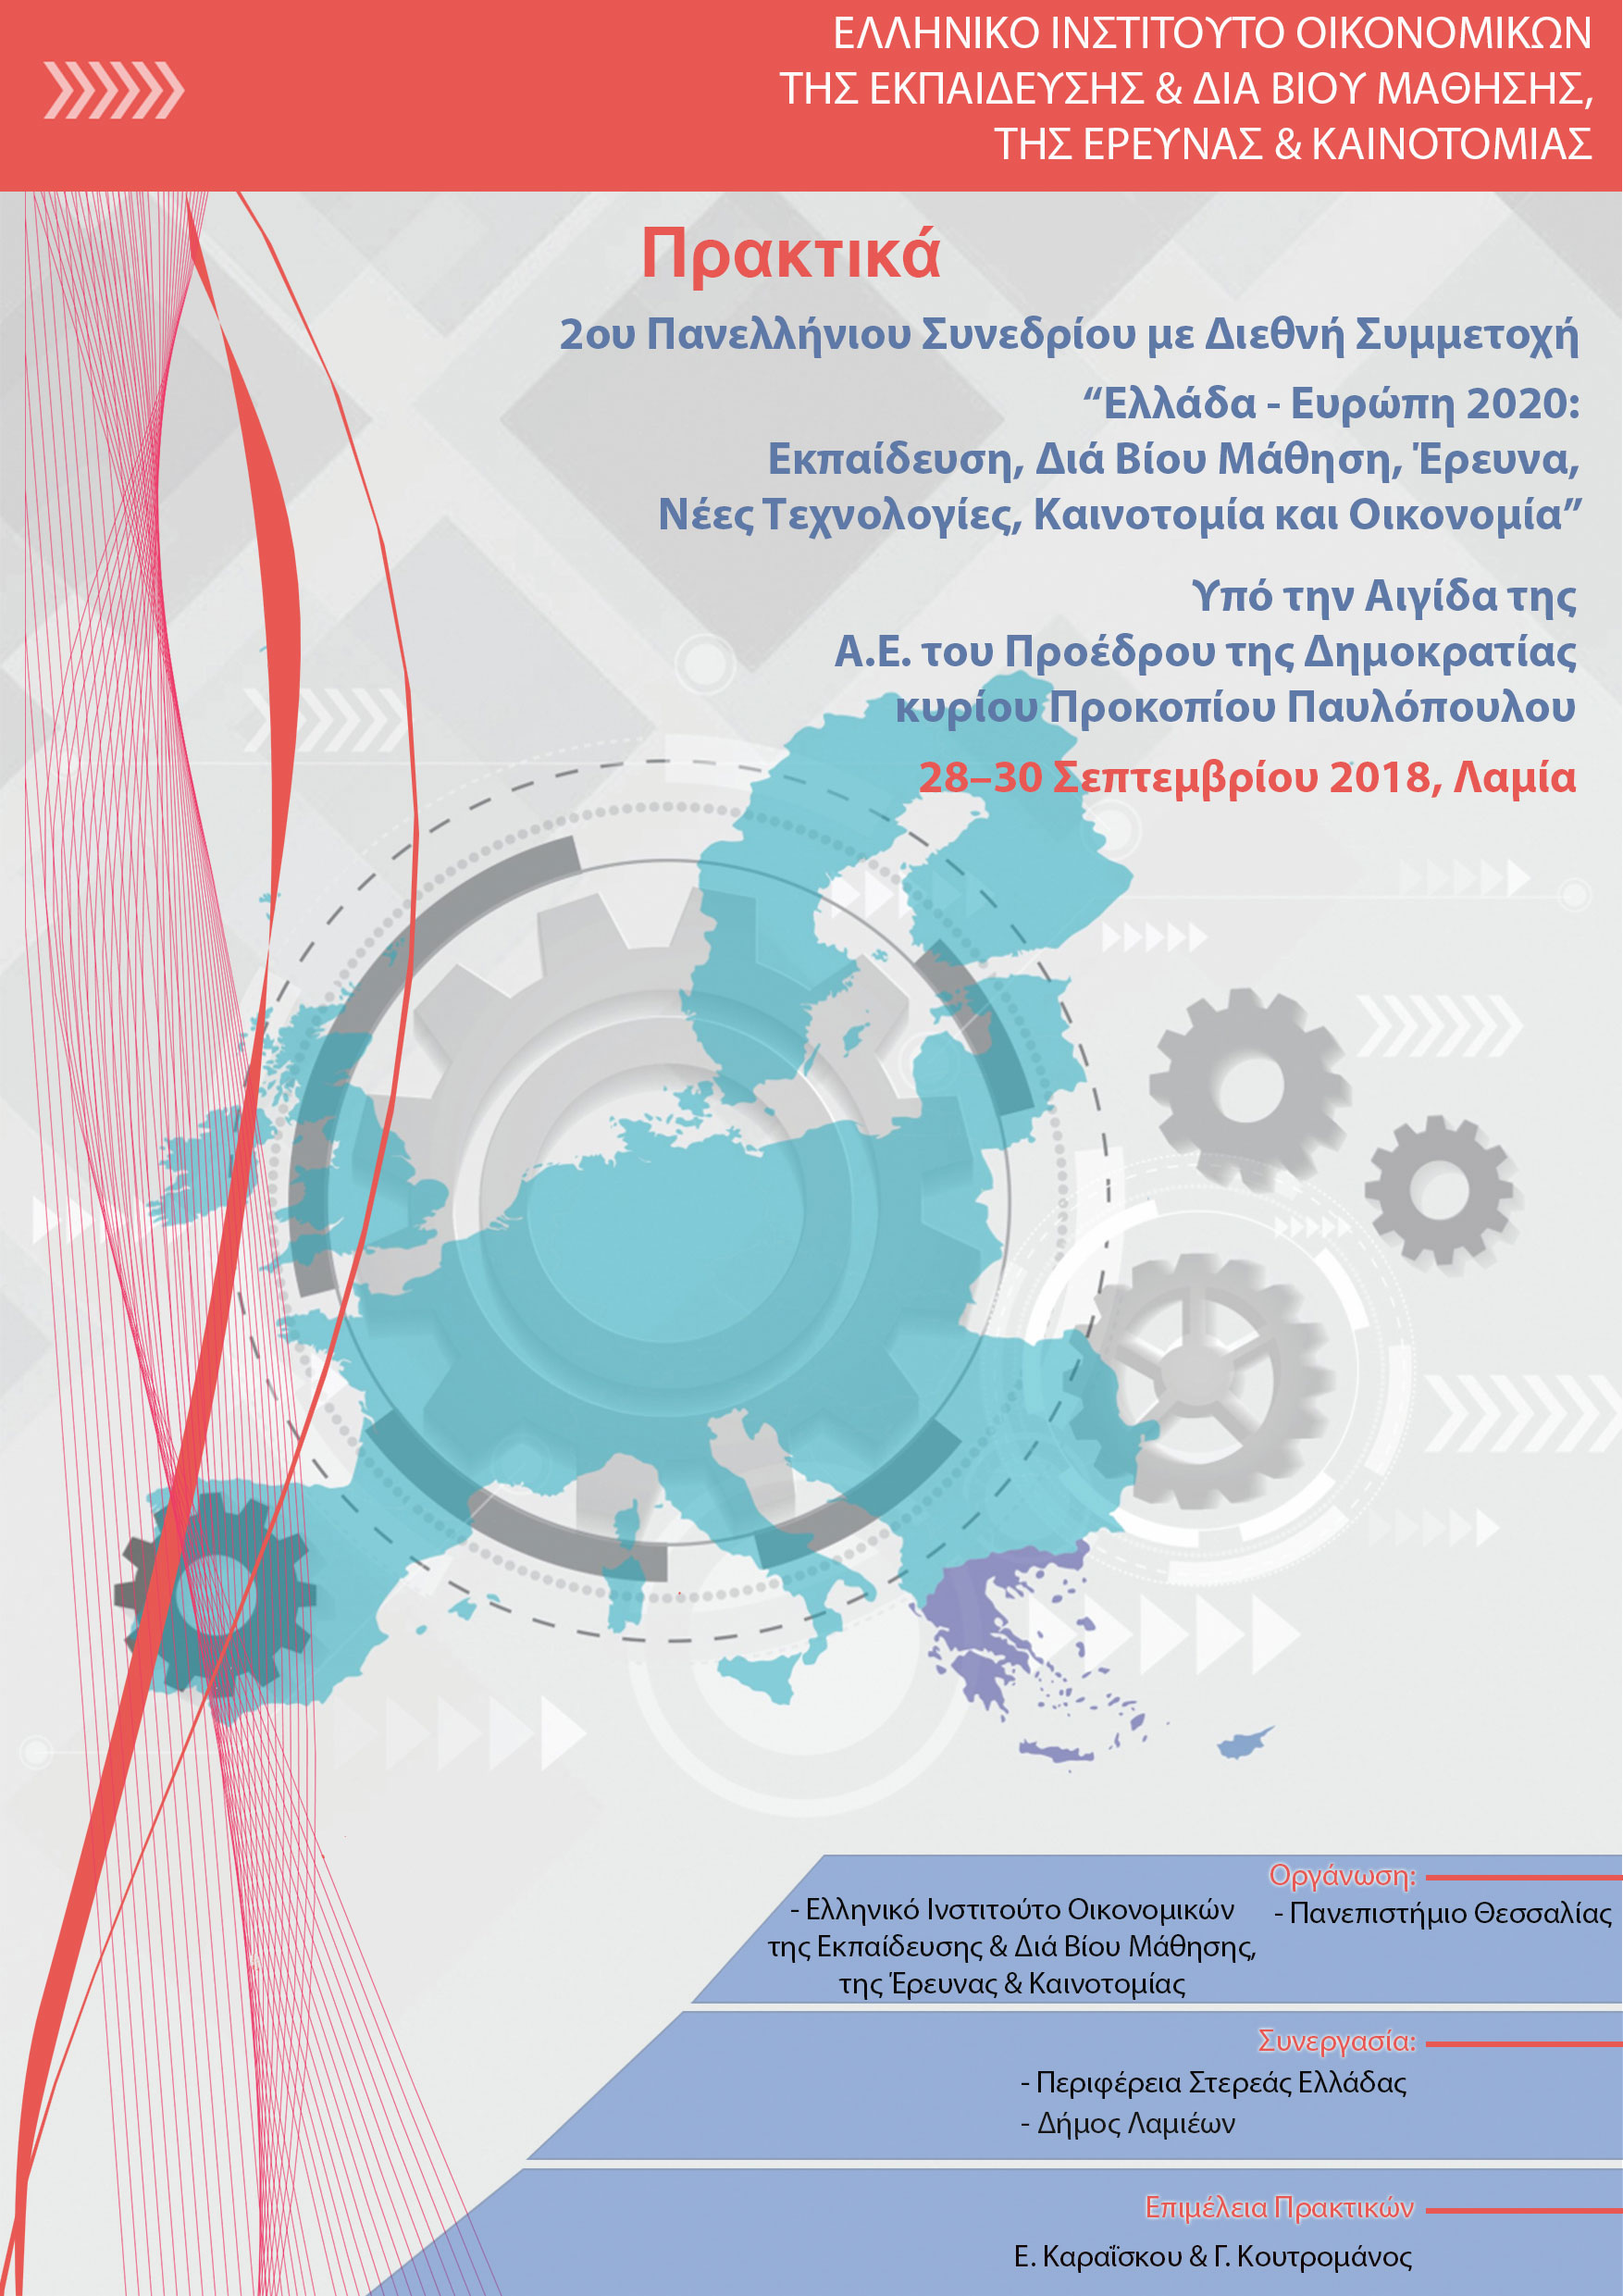 Proceedings of the 2nd  Panhellenic Scientific Conference with International Participation “Greece-Europe 2020: Education, Lifelong Learning, Research, New Technologies, Innovation and Economy”, Lamia, 28,29,30 September 2018